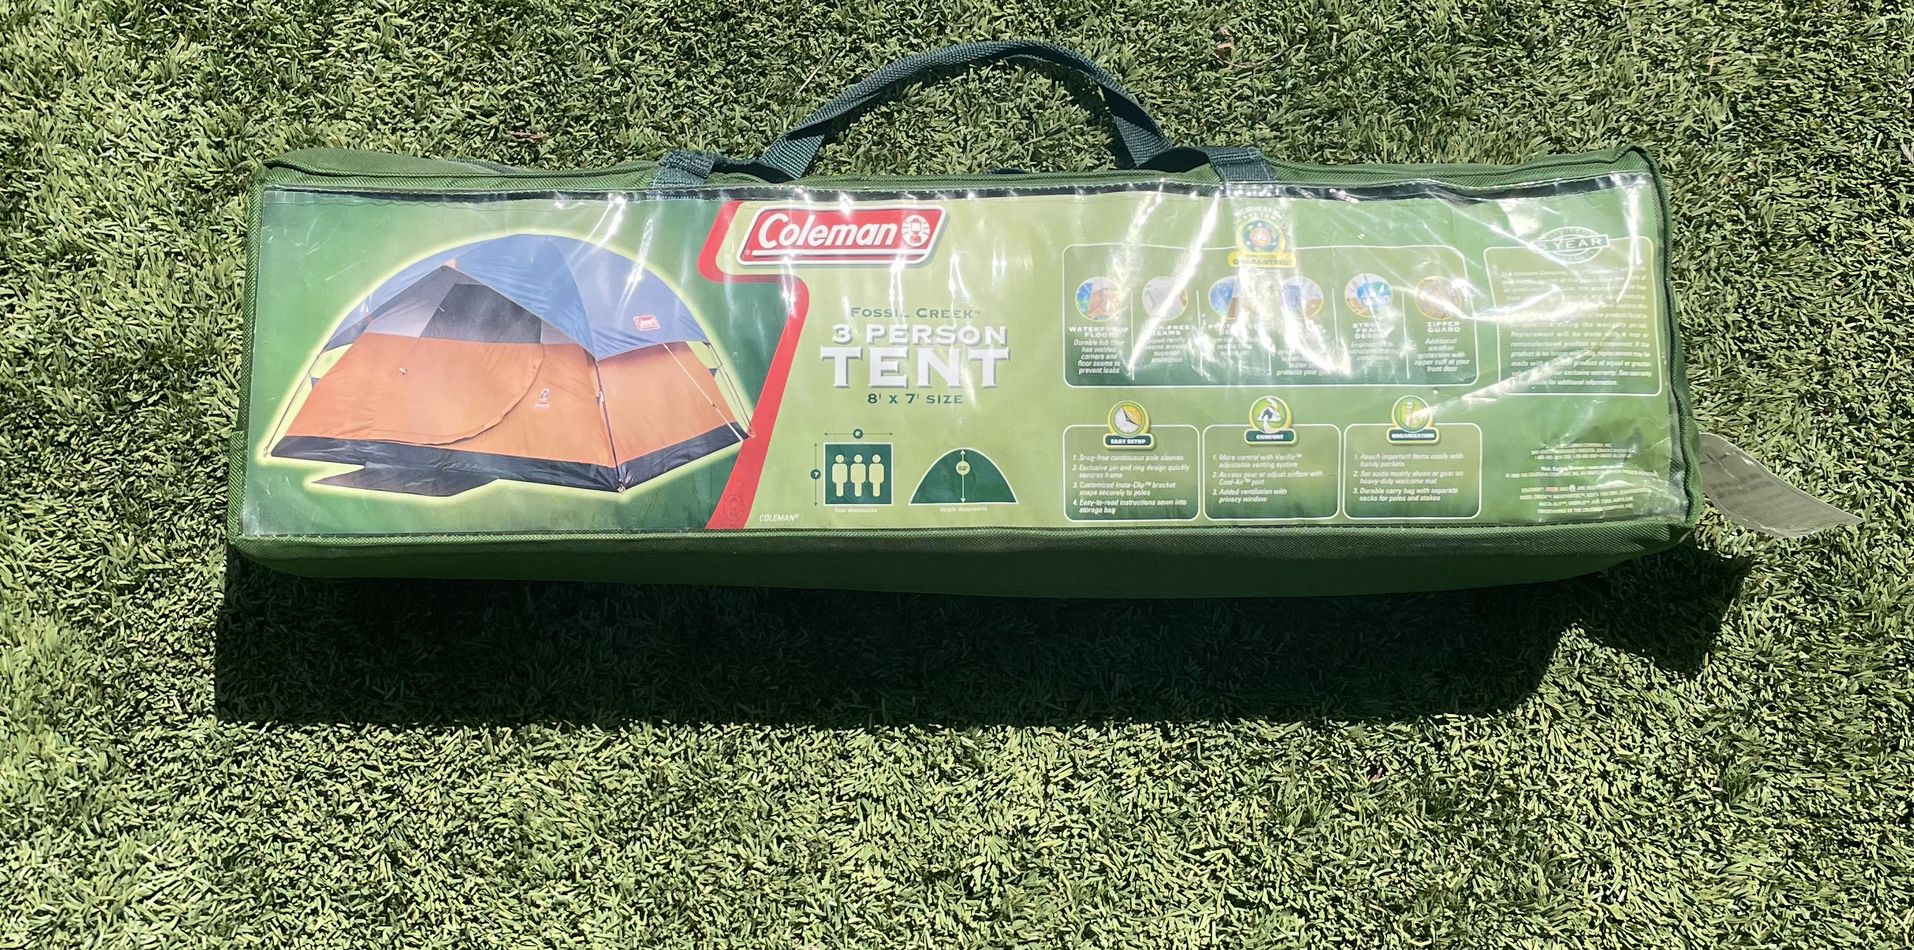 NEW! COLEMAN 3 PERSON TENT - 8 ft X 7 ft. 52” Inside Height